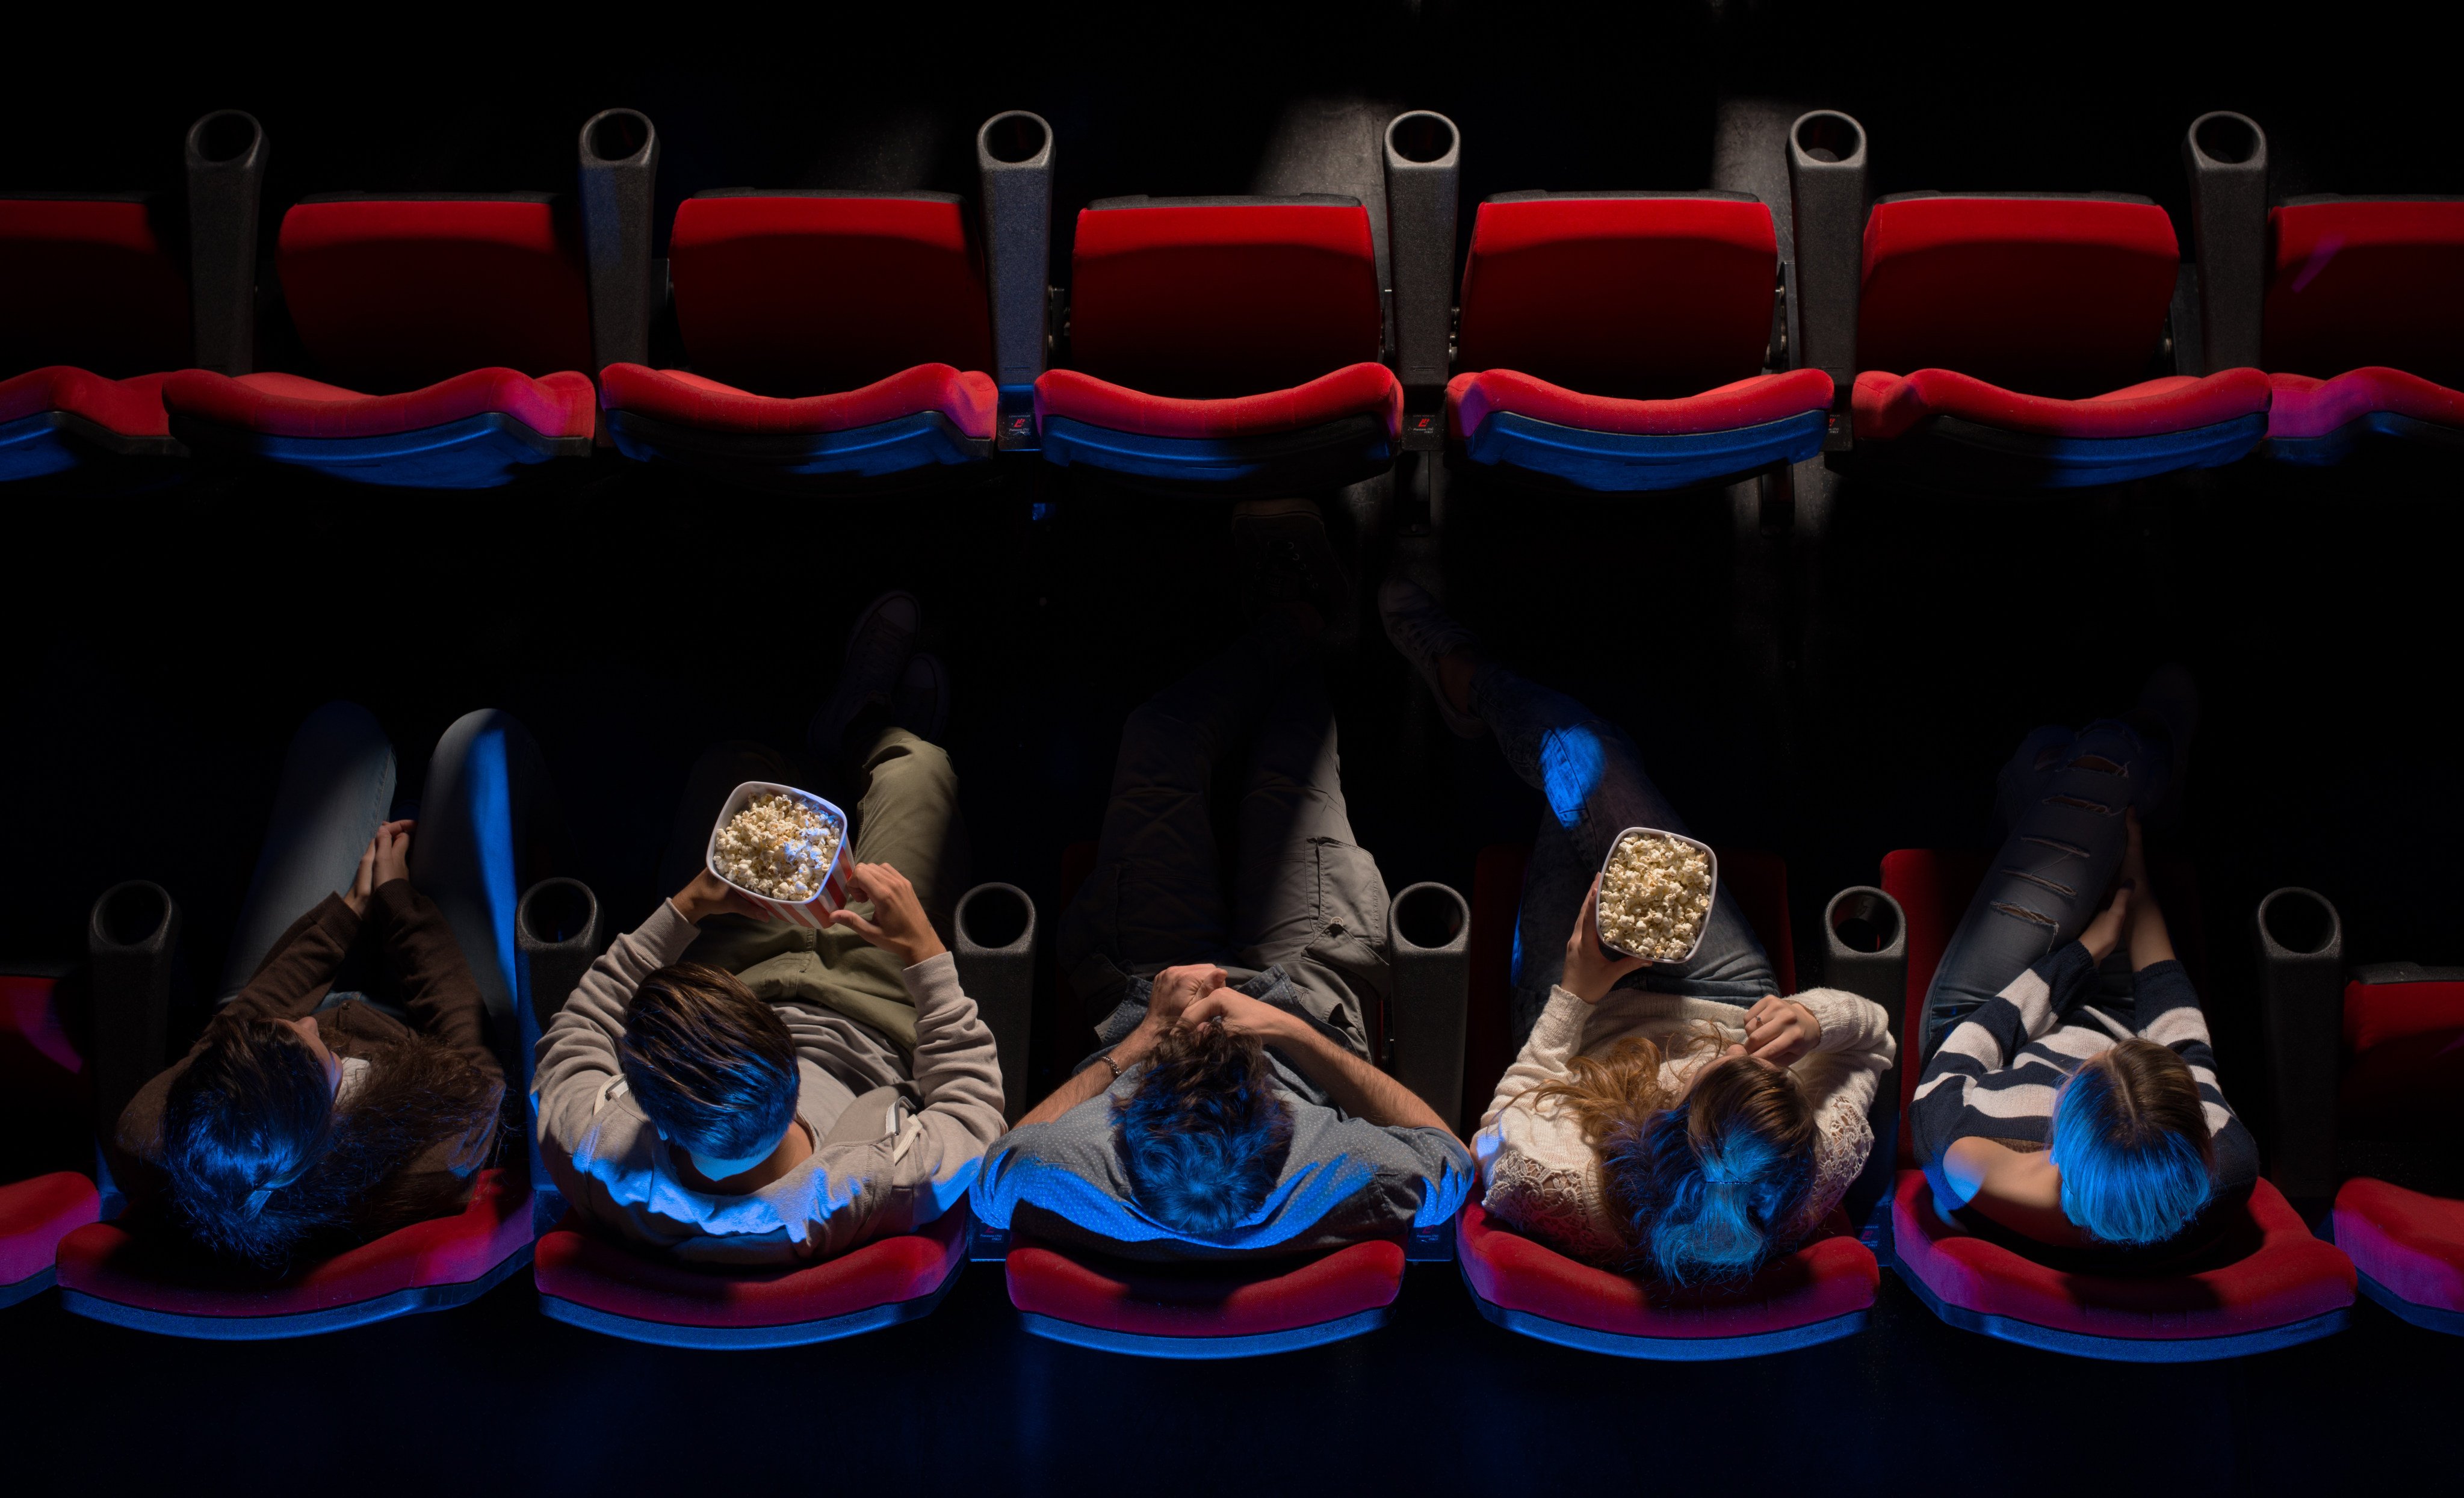 Movie-goers will be able to enjoy a variety of old and new films with discount tickets available on Saturday, an industry representative has said. Photo: Shutterstock